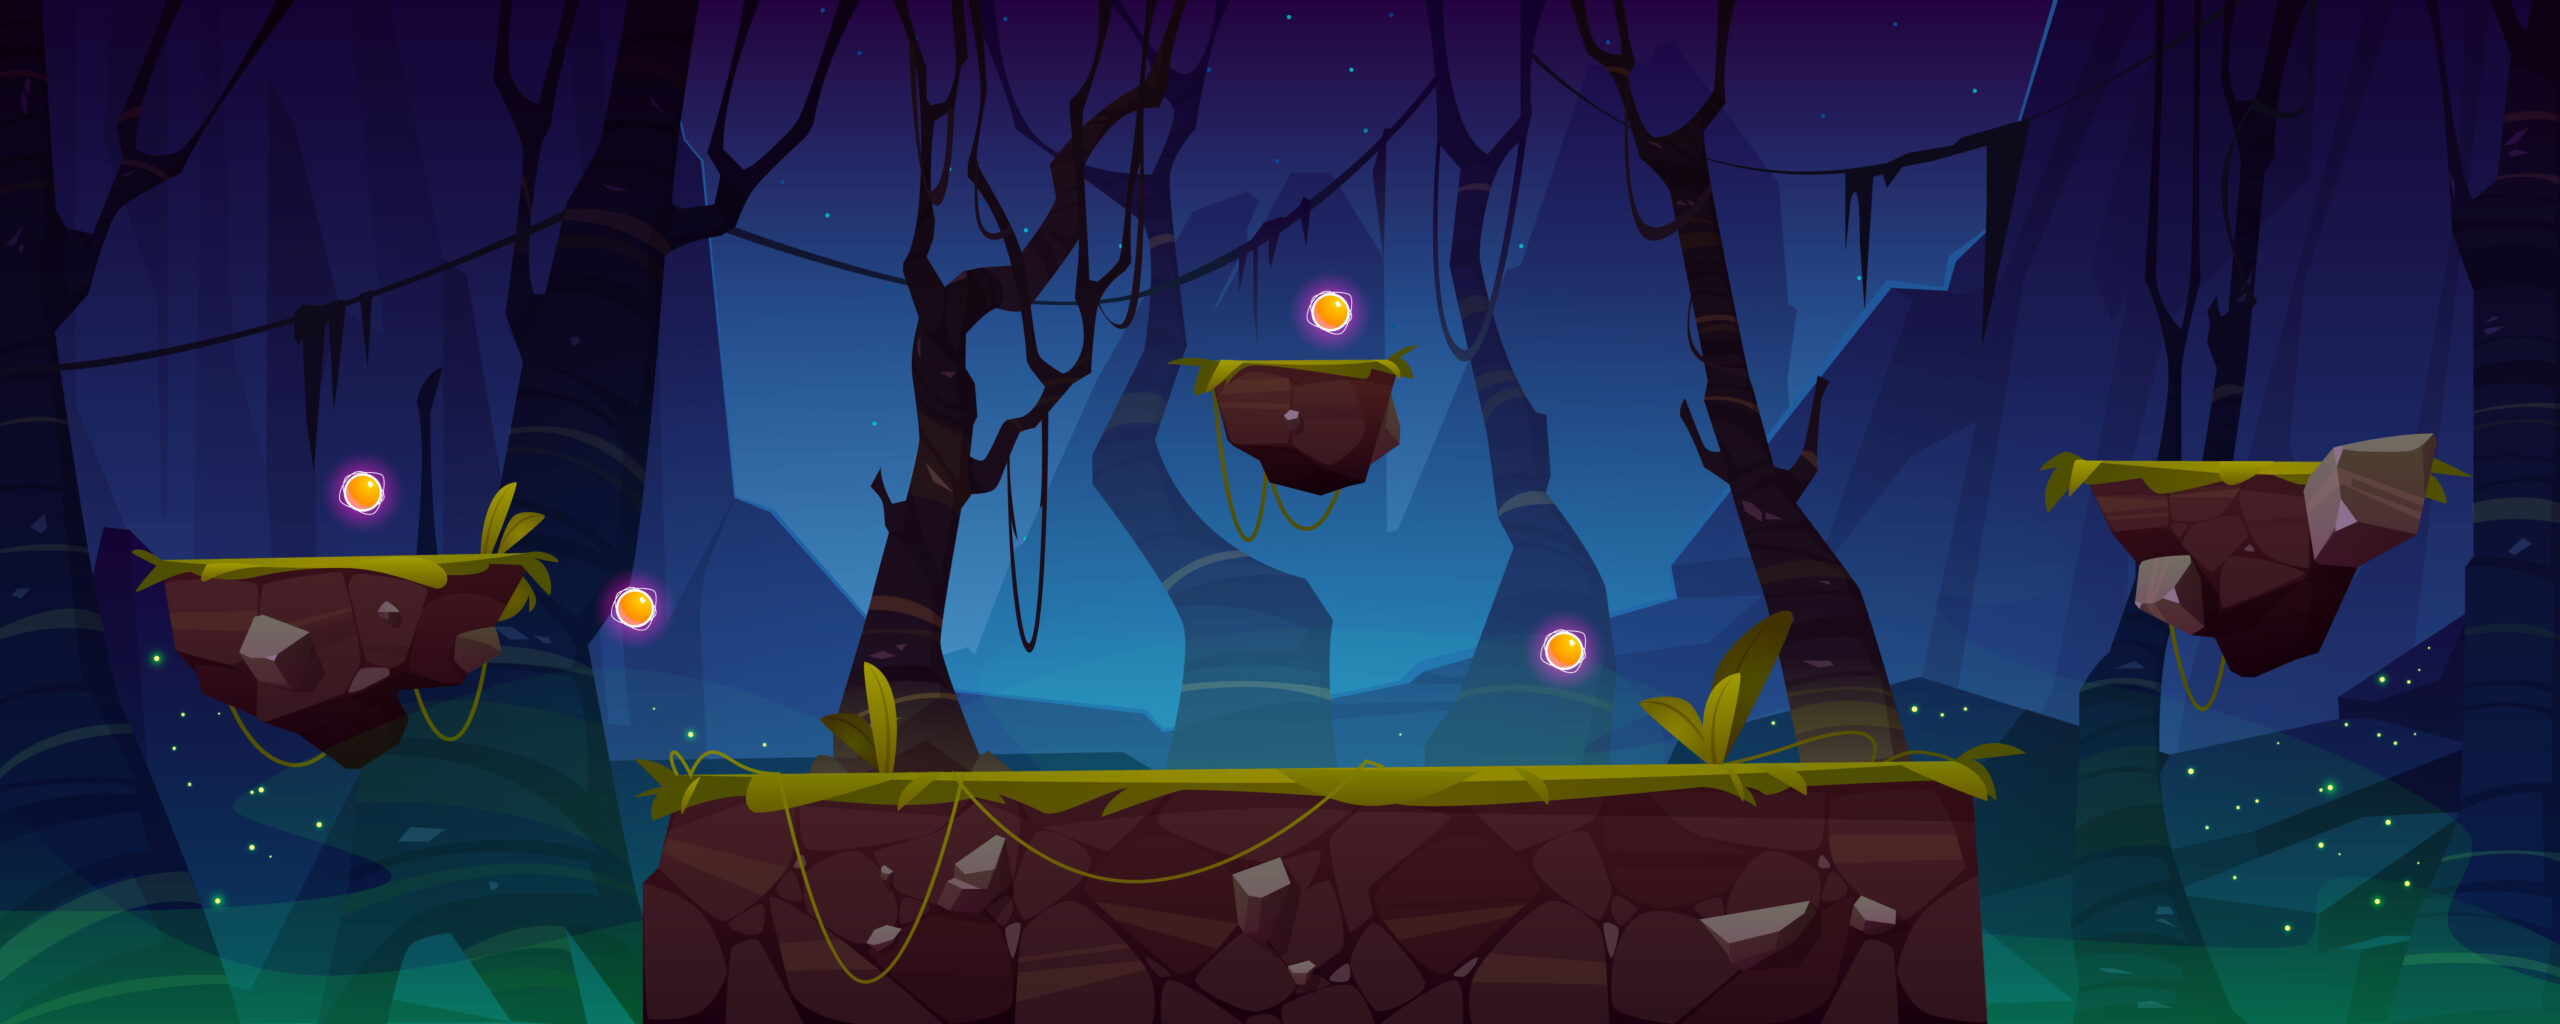 Game level background with platforms and items